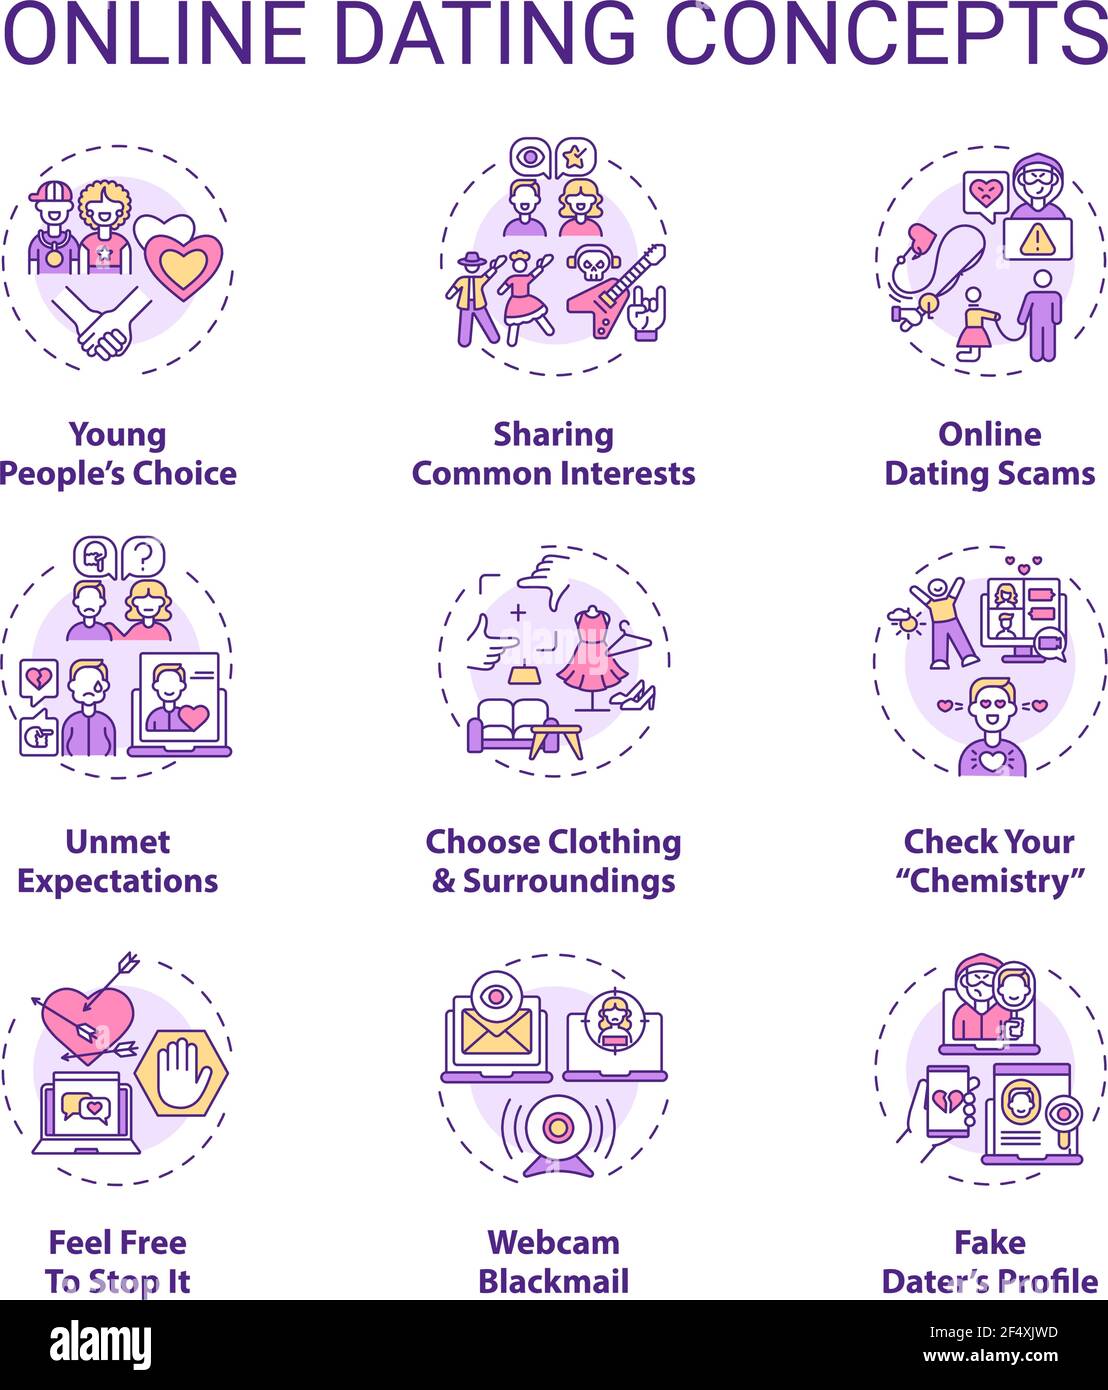 Online dating concept icons set. Stock Vector